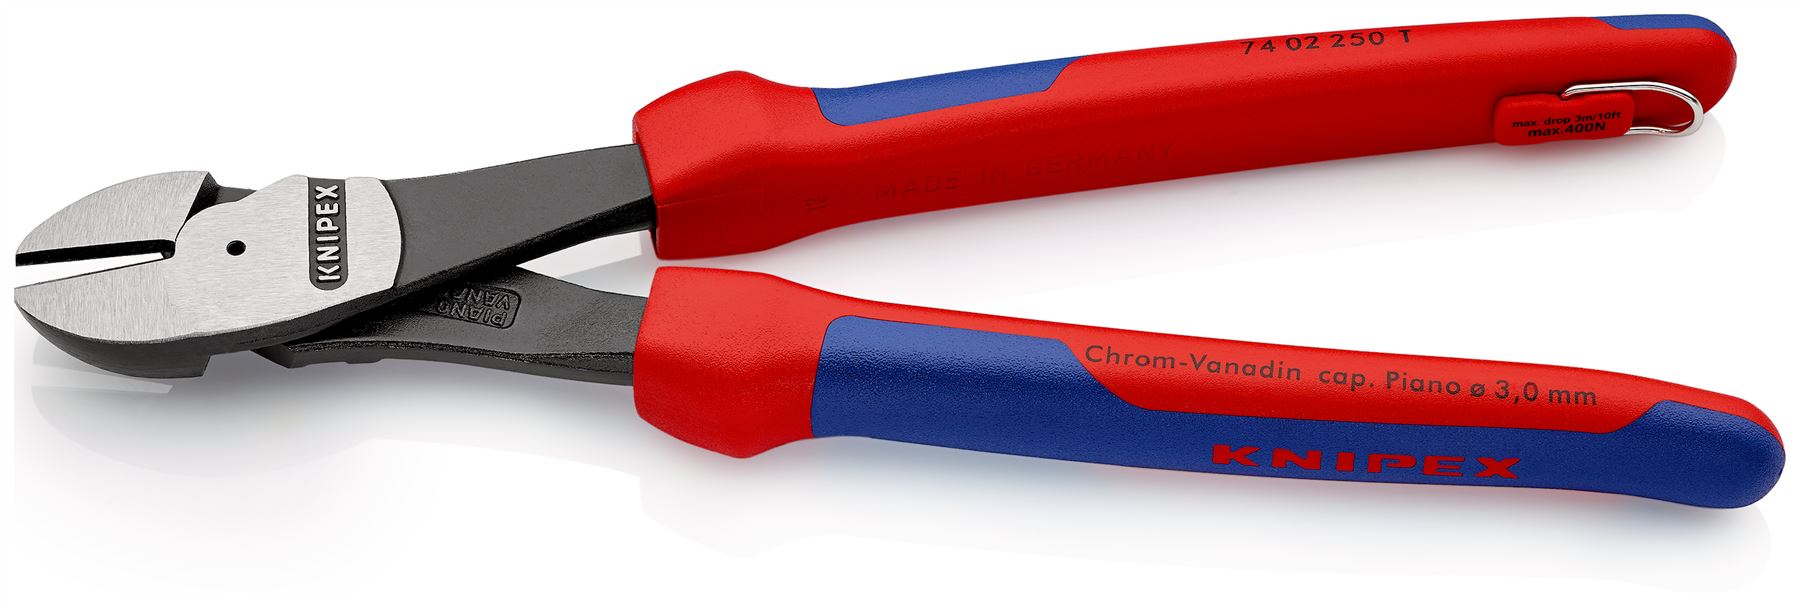 Knipex High Leverage Diagonal Cutter 250mm Multi Component Grips with Tether Point 74 02 250 T